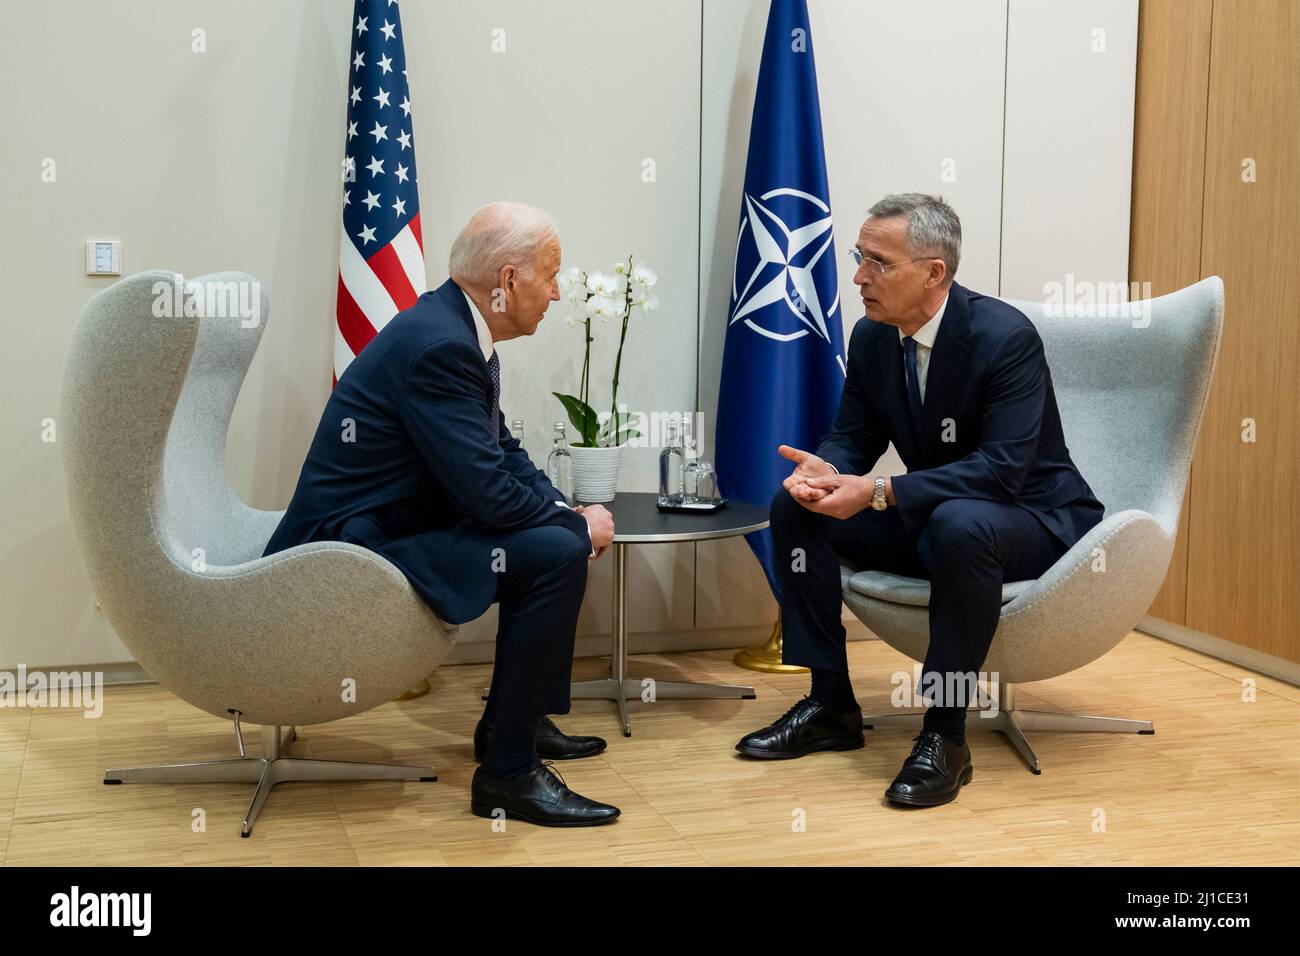 Brussels, Belgium. 24th Mar, 2022. U.S President Joe Biden, left, holds a bilateral meeting with NATO Secretary General Jens Stoltenberg on the sidelines of the extraordinary NATO summit at NATO headquarters, March 24, 2022 in Brussels, Belgium. Biden is hoping European allies will continue to ramp up pressure on Russia as Ukraine marks a month since the invasion. Credit: Adam Schultz/White House Photo/Alamy Live News Stock Photo